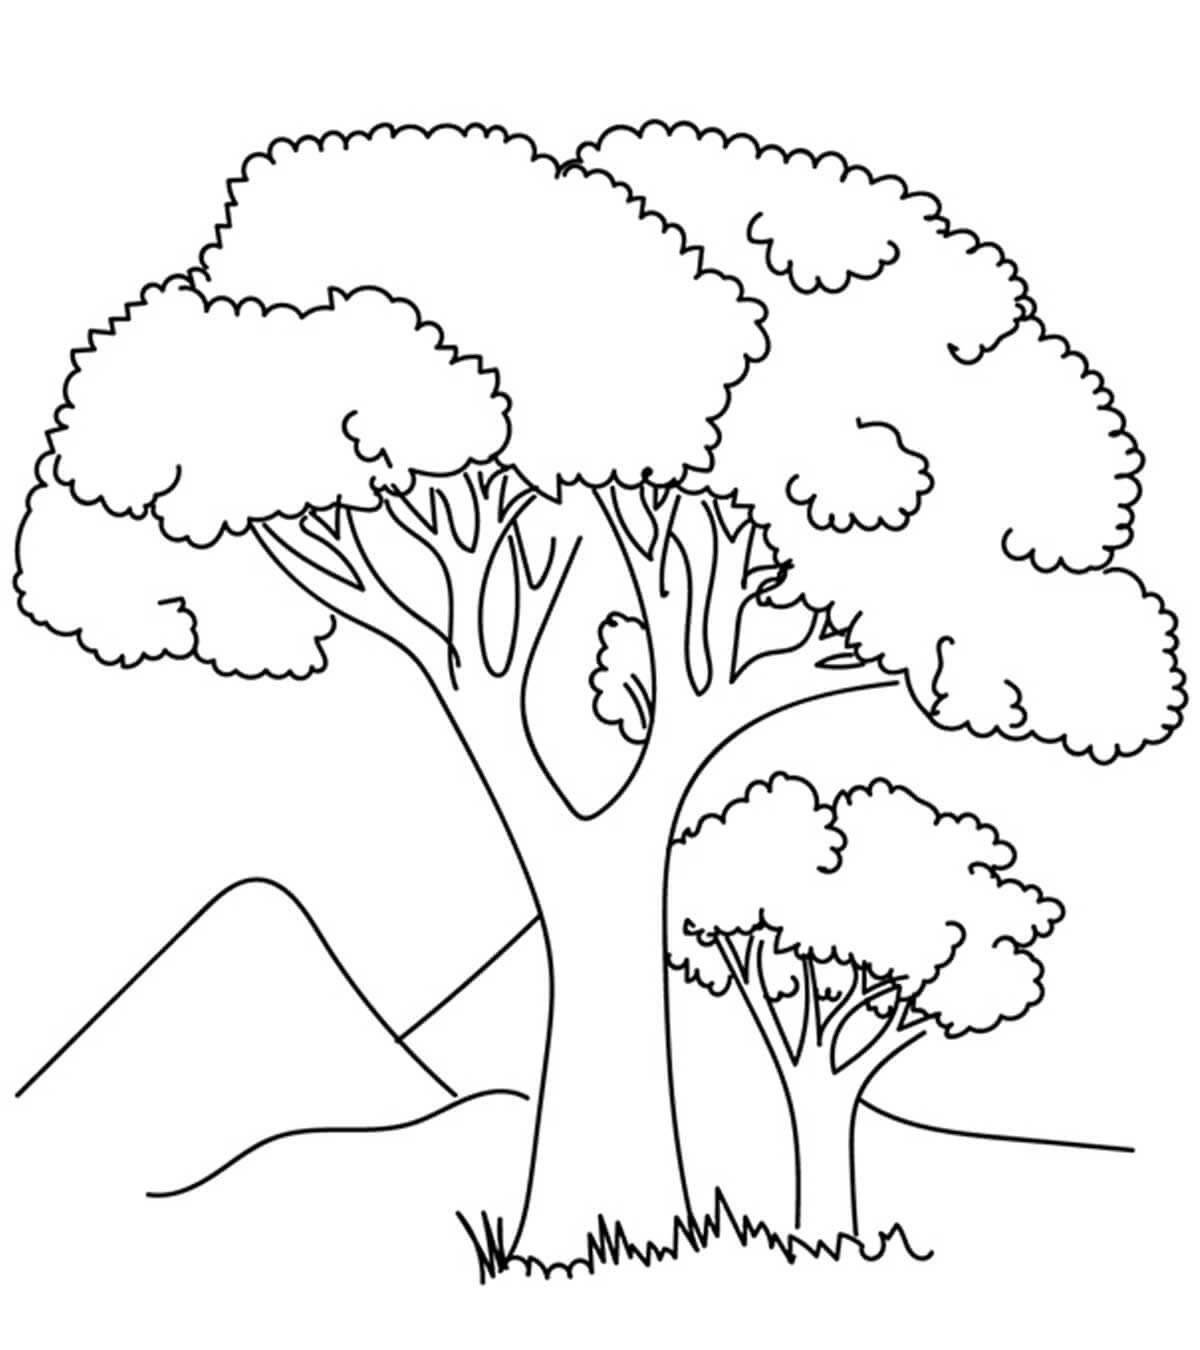 Colored drawing of a tree for children